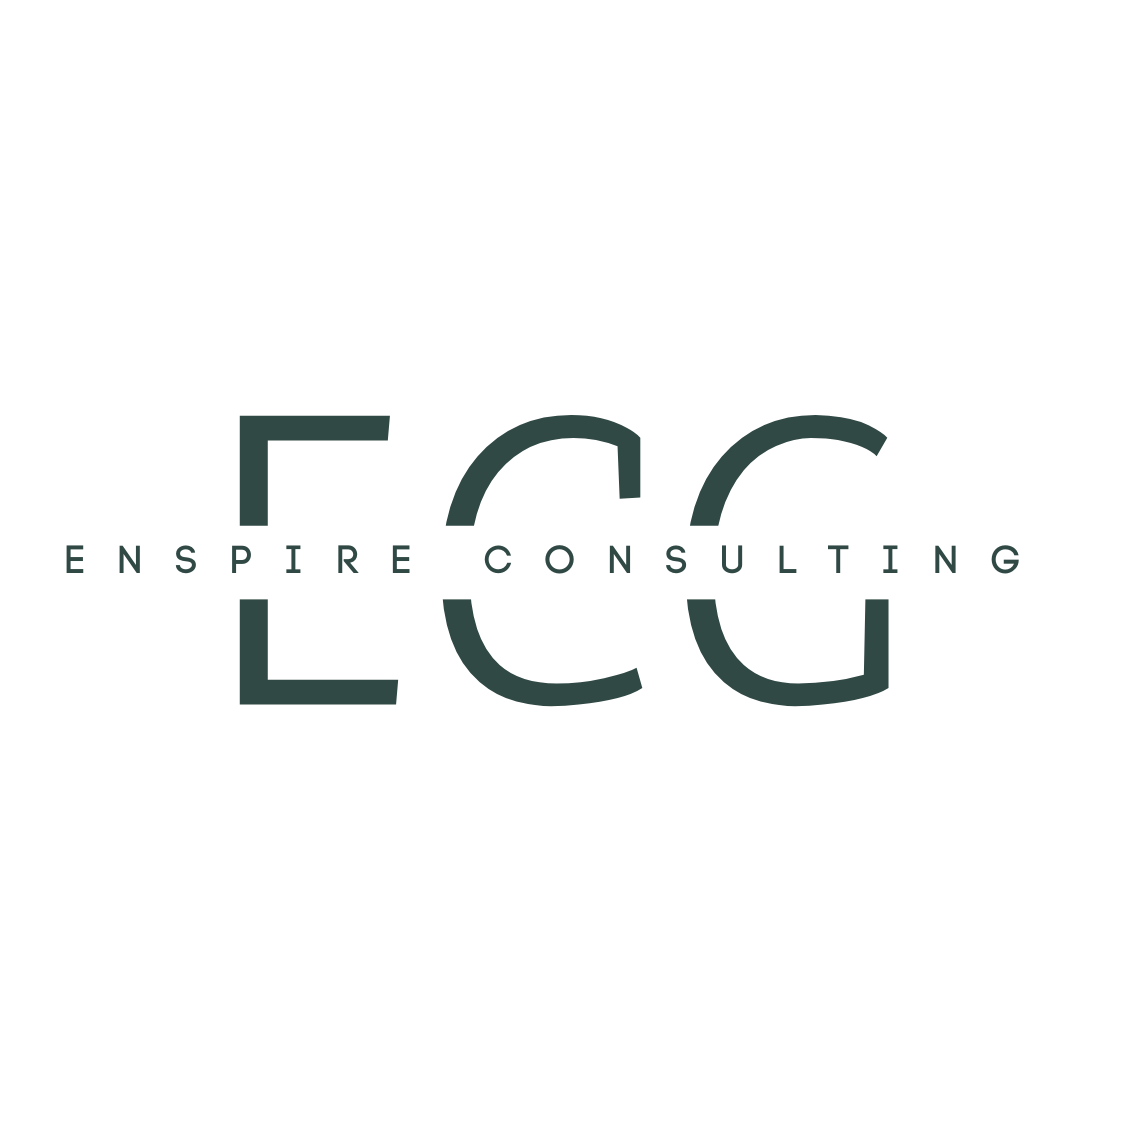 Enspire Consulting Group